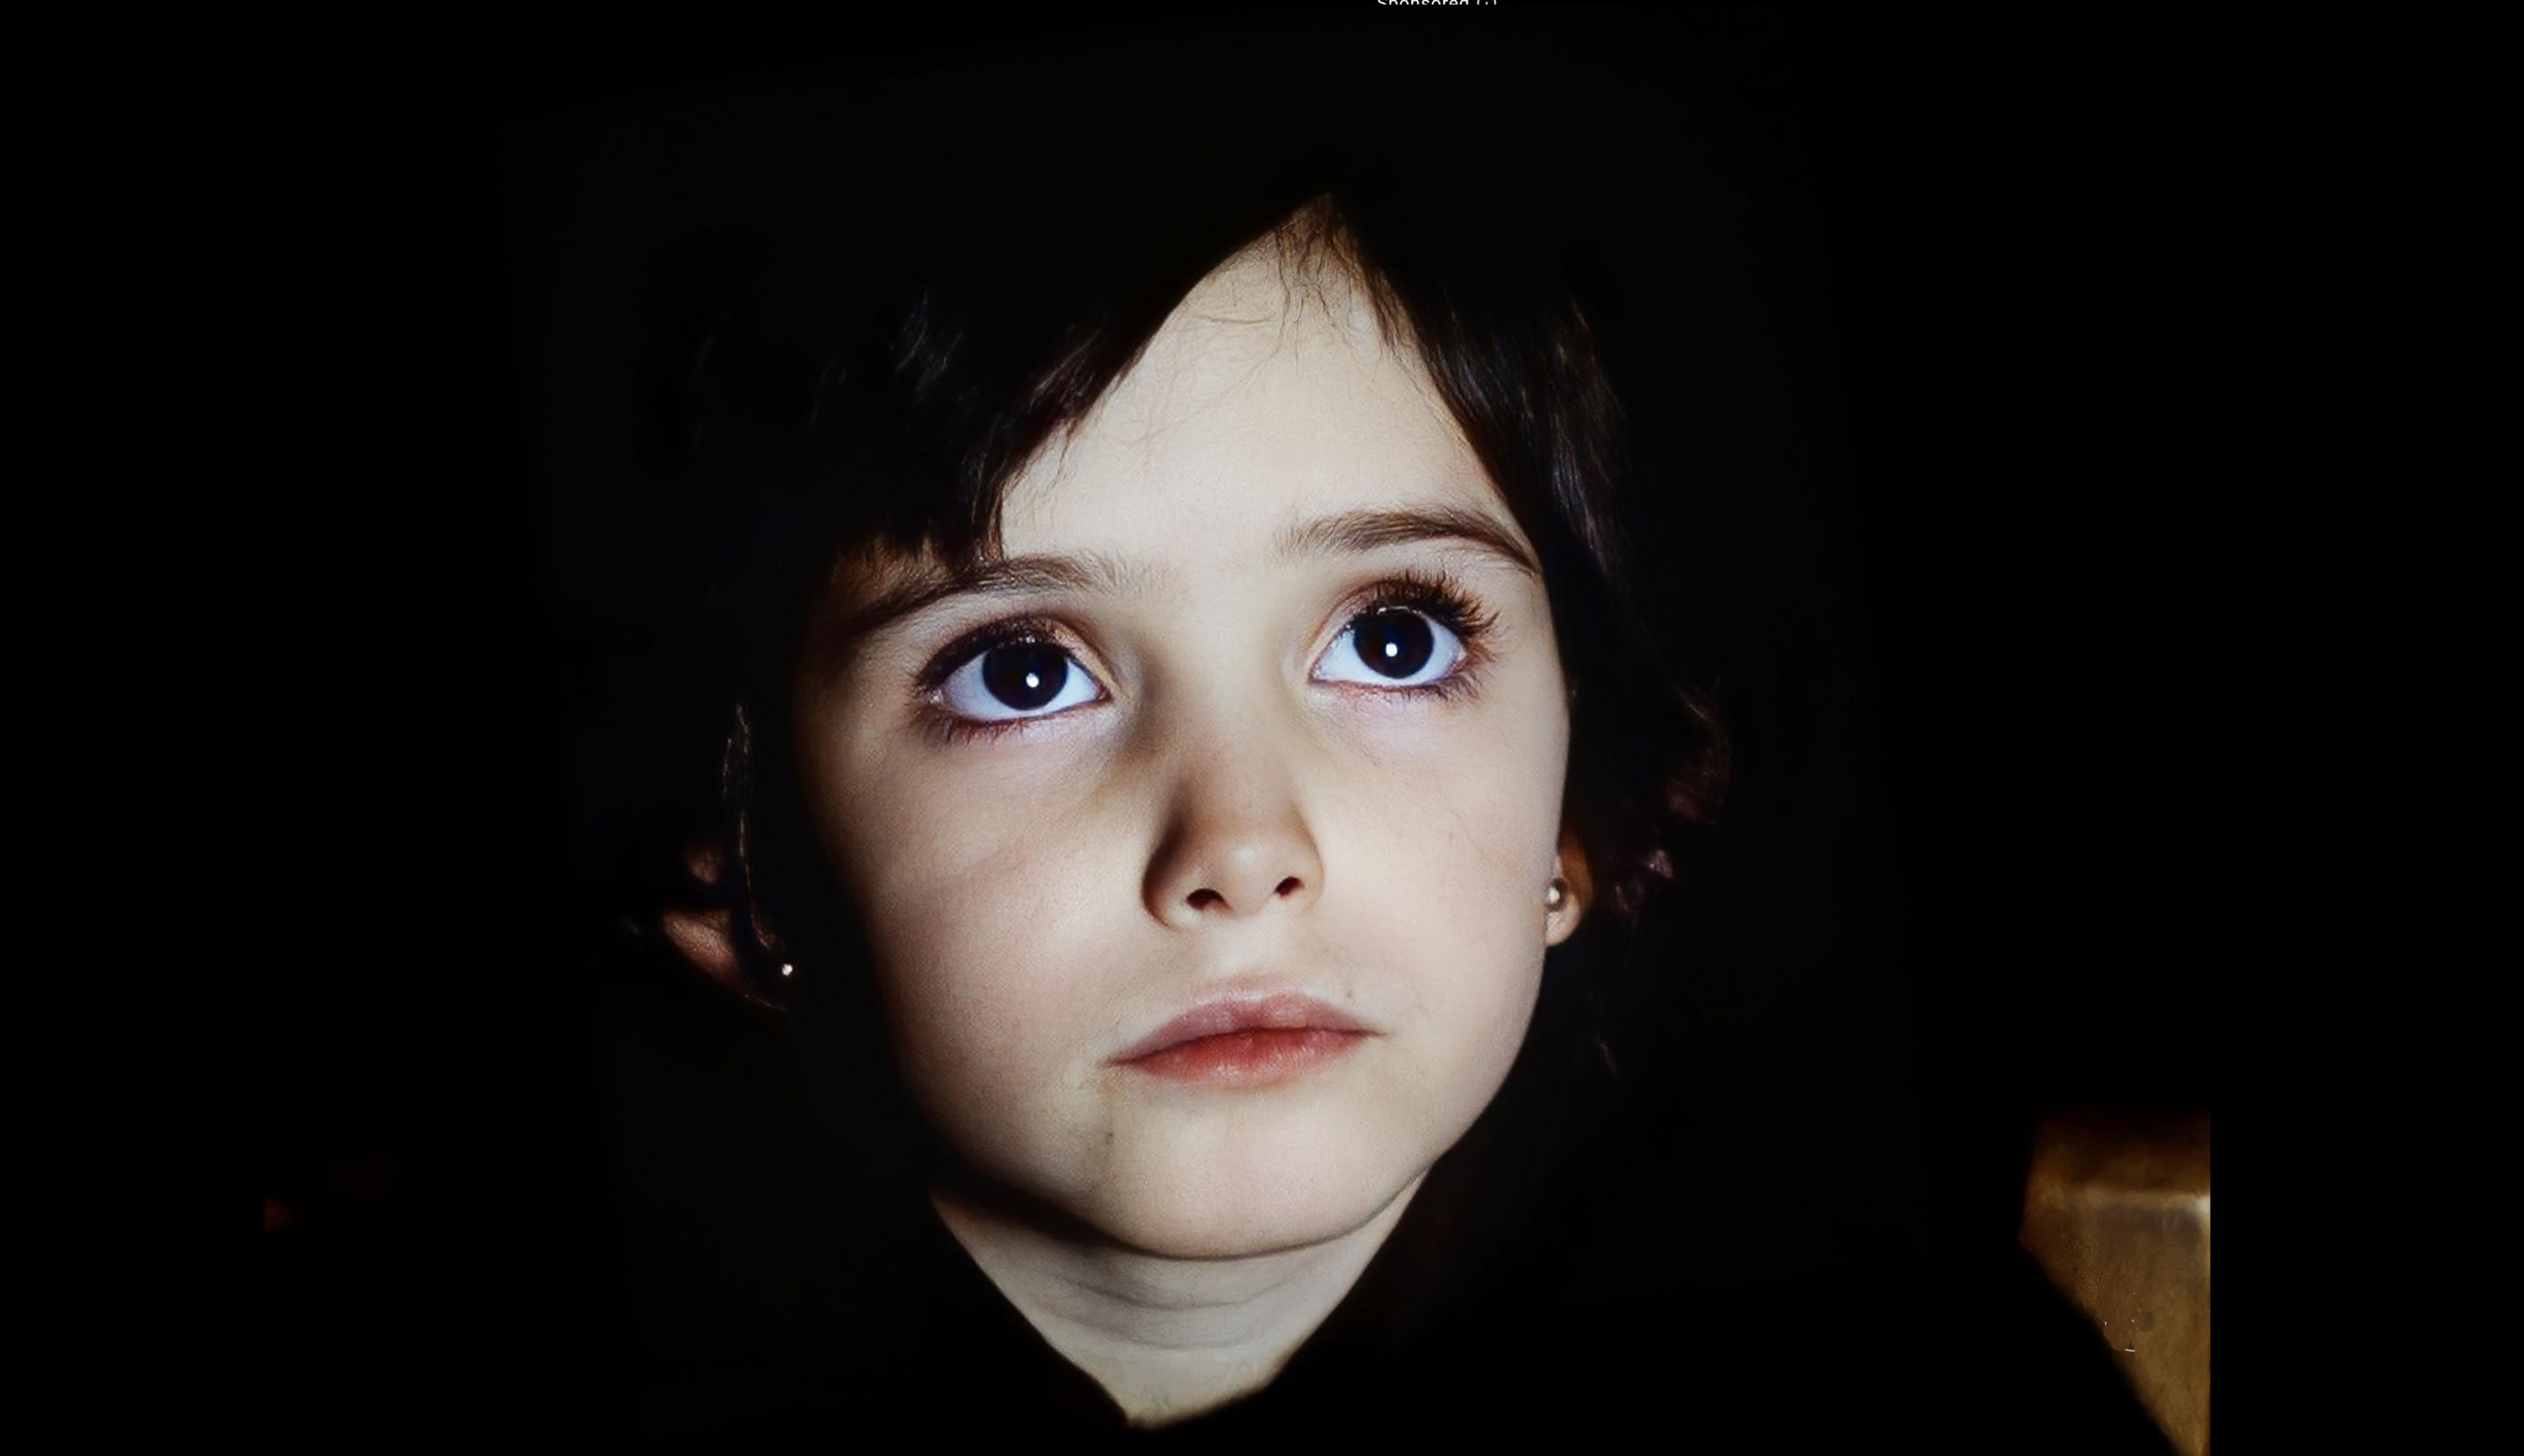 Ana Torrent as a child